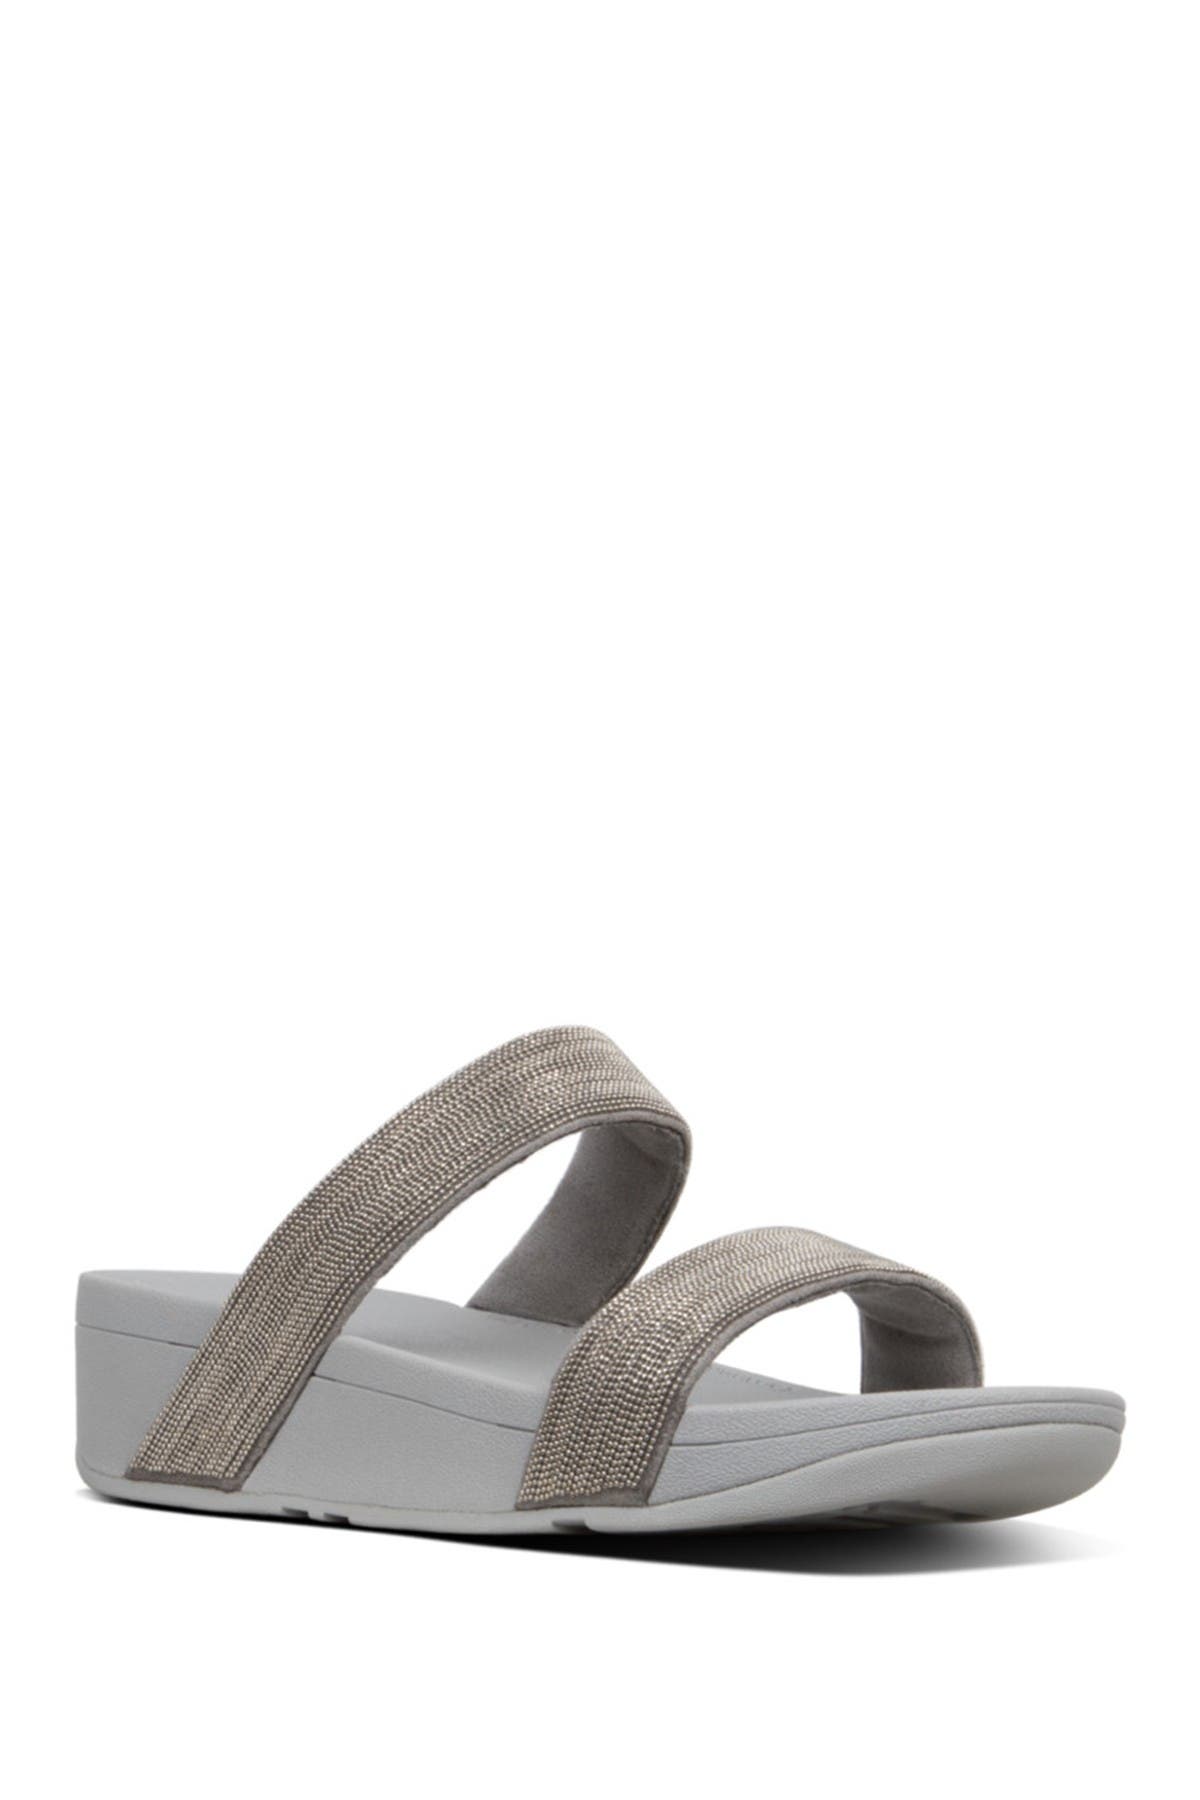 fitflop shoes nordstrom rack